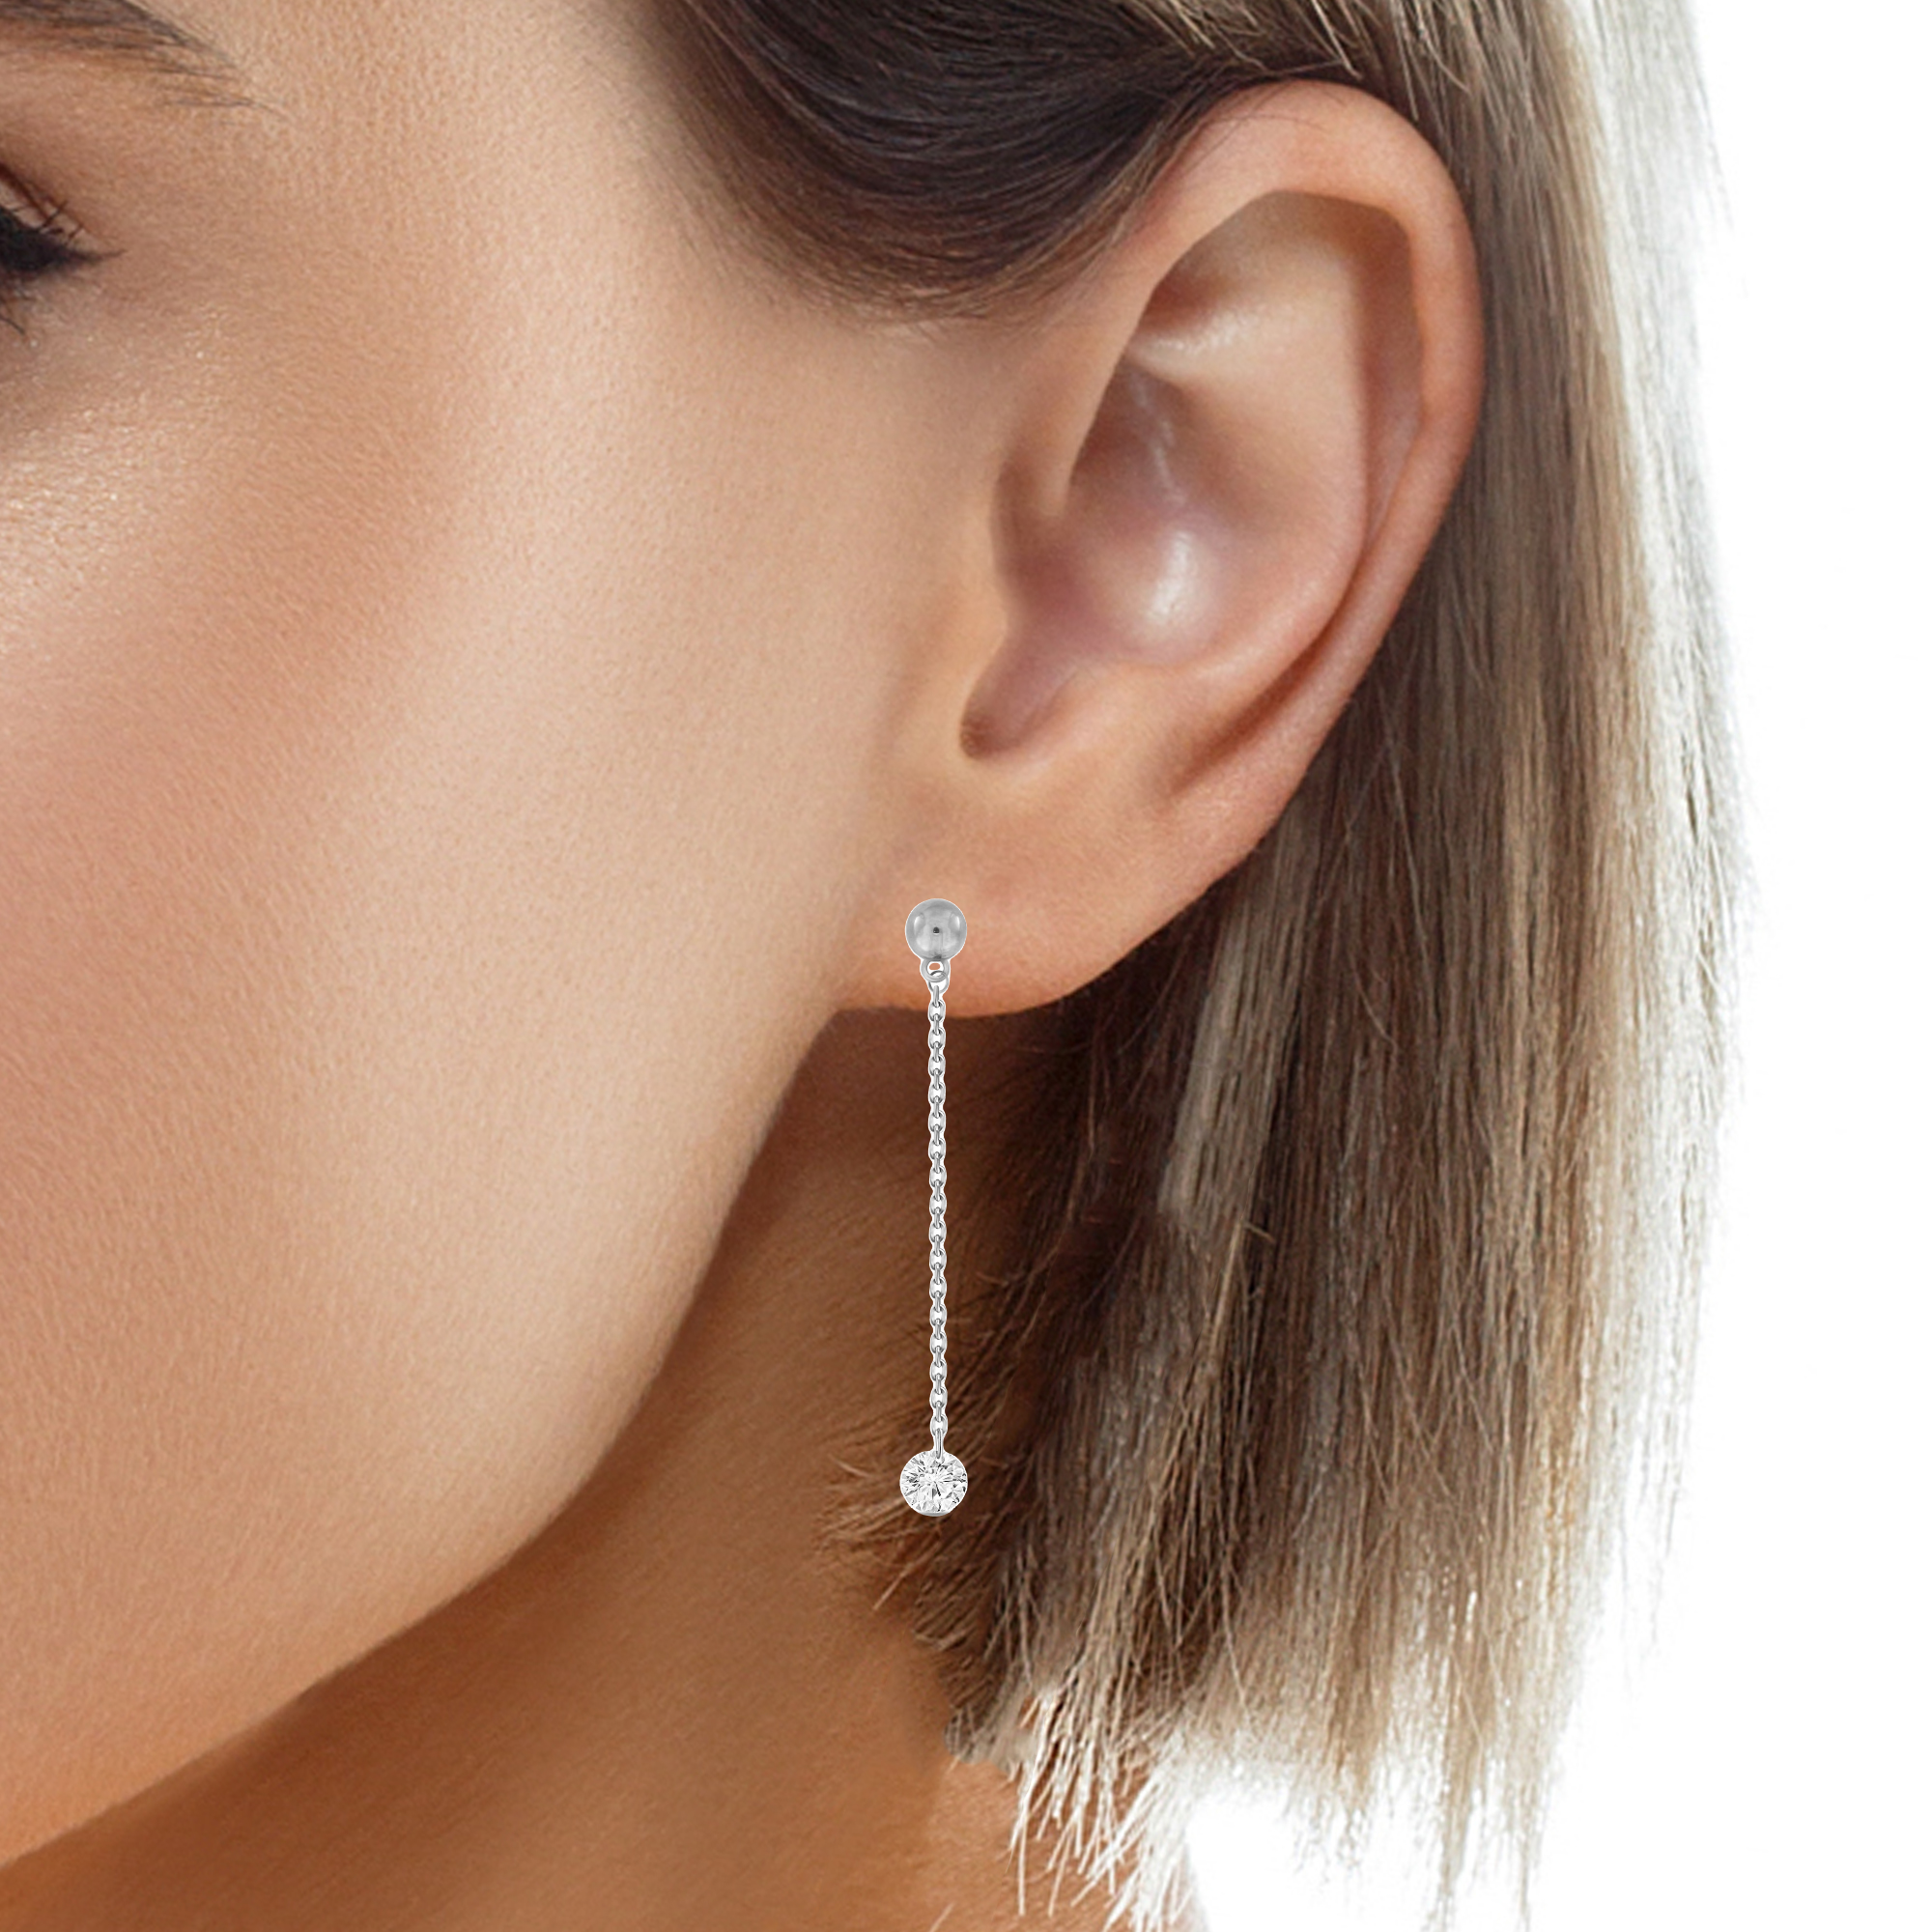 These diamonds float and dance, captivating in their intricate motion. Crafted in shimmering 18k white gold, they hold 0.34 cts of brilliant round diamonds. Held securely by a secure friction back, these earrings reach a length of 1.5" and are the perfect adornment for any occasion.